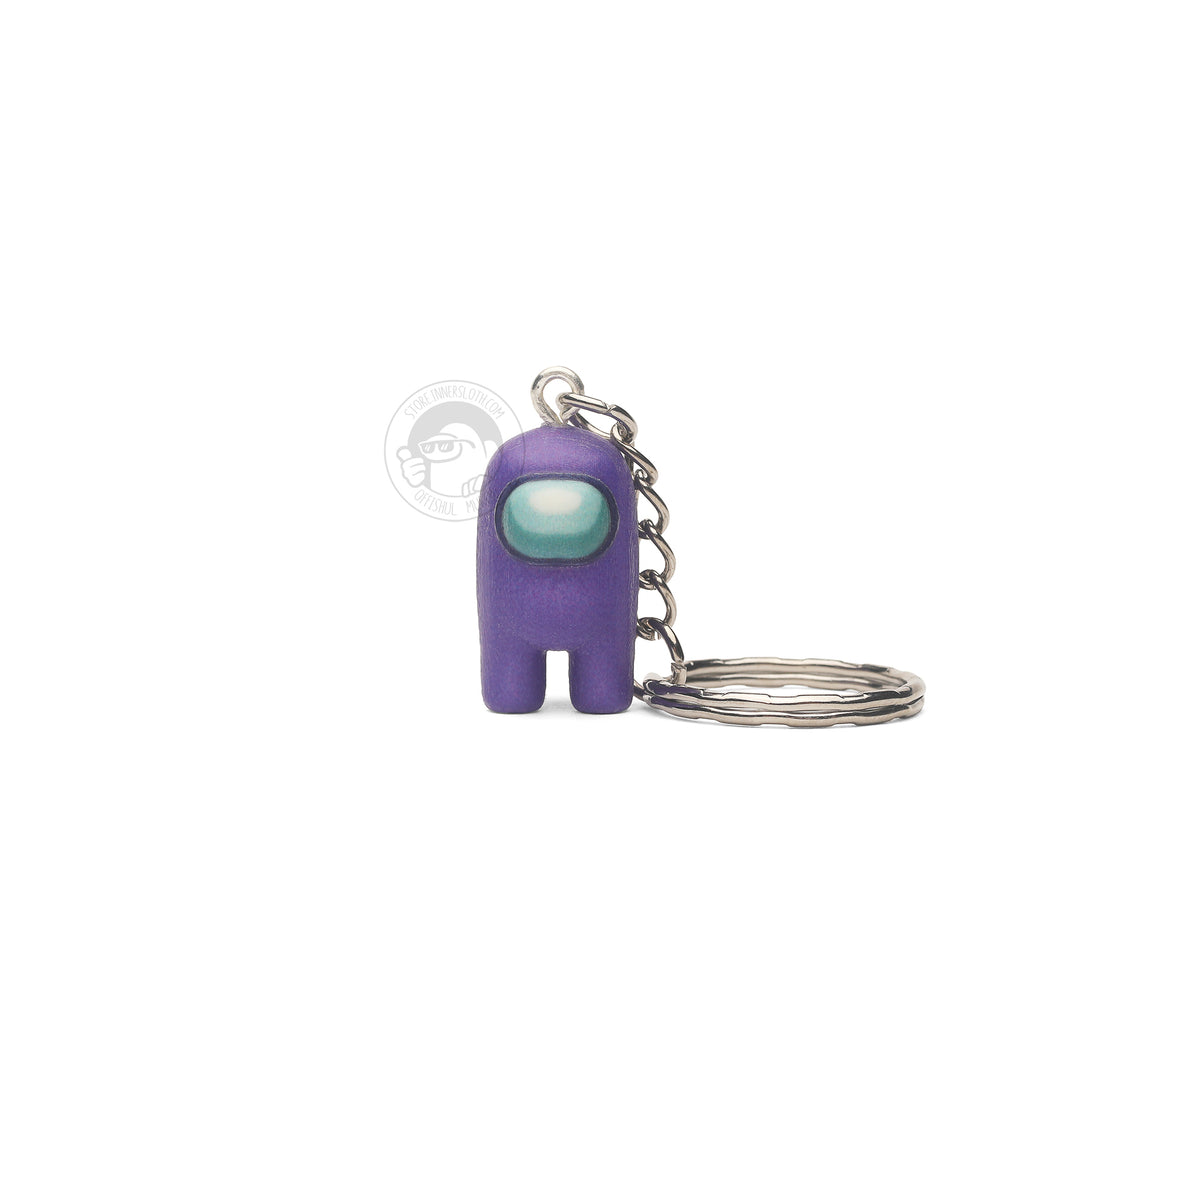 A product photo of the Among Us: Crewmate Keychain by Objex Unlimited Inc. in purple. It is standing, and a silver keychain rests beside it.